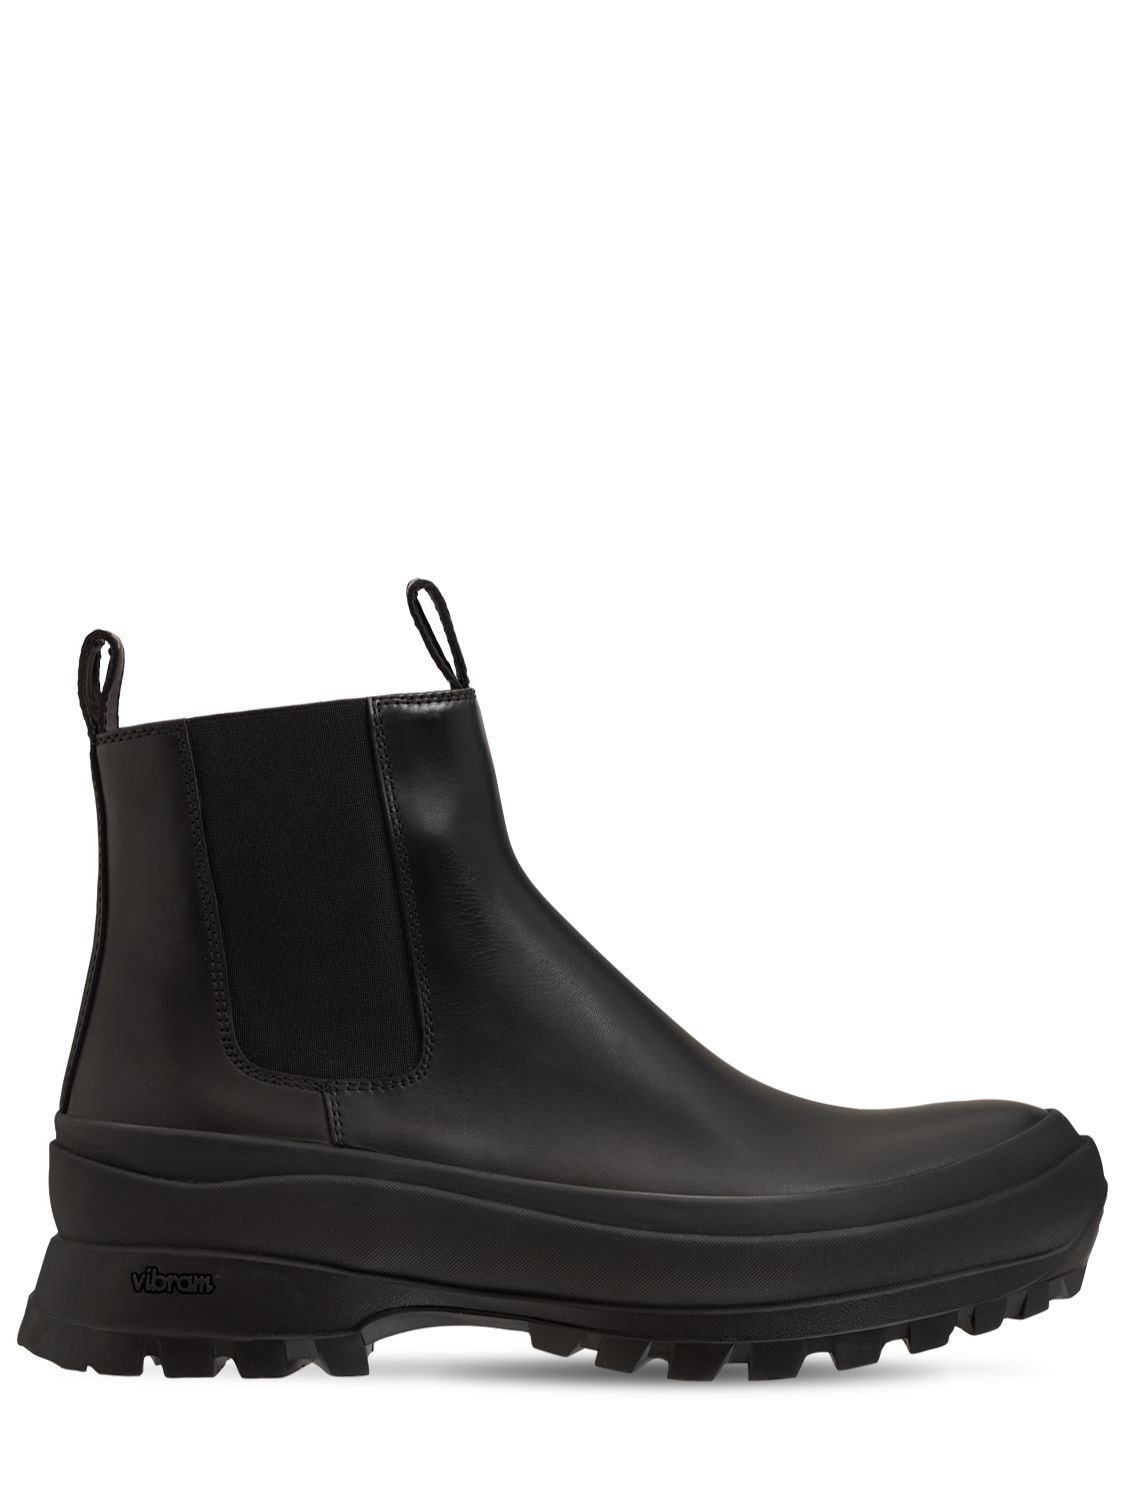 Florence Leather Chelsea Boots Luisaviaroma Men Shoes Boots Chelsea Boots 